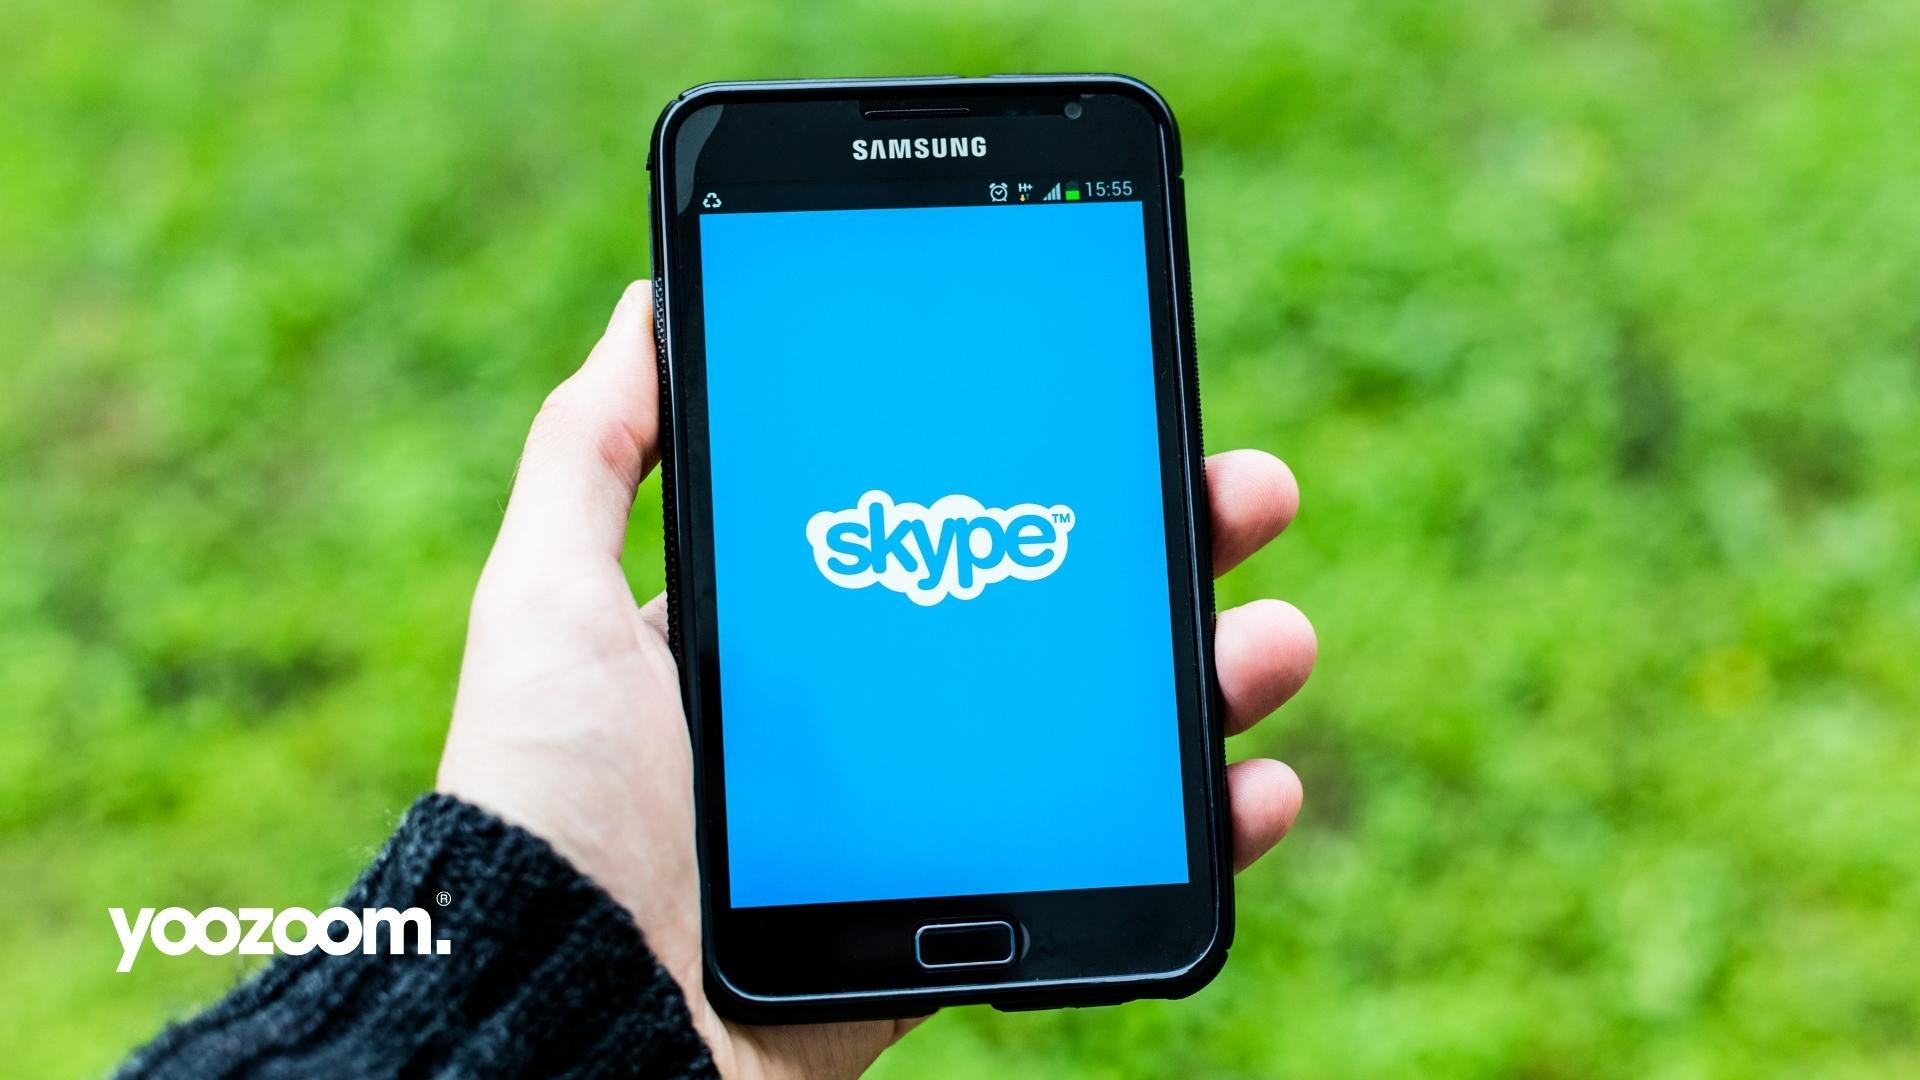 Ten years ago, Skype was everywhere. Now… not so much. But what happened, exactly? Read on to discover the truth behind Skype's rise and fall.